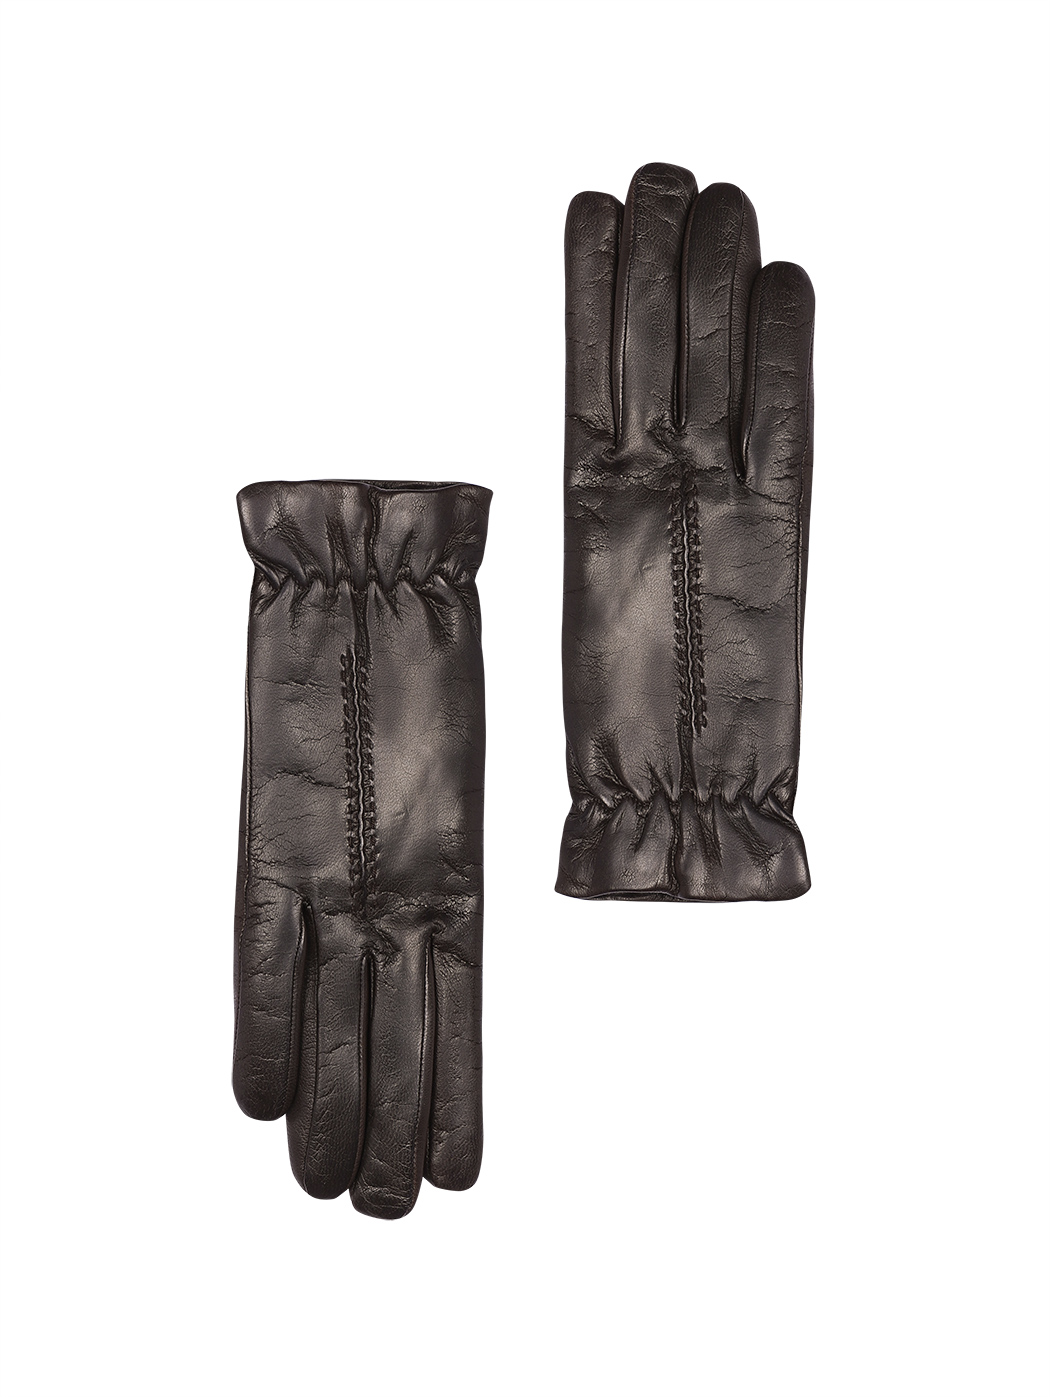 Women's Gloves in Wool and Leather Dark brown